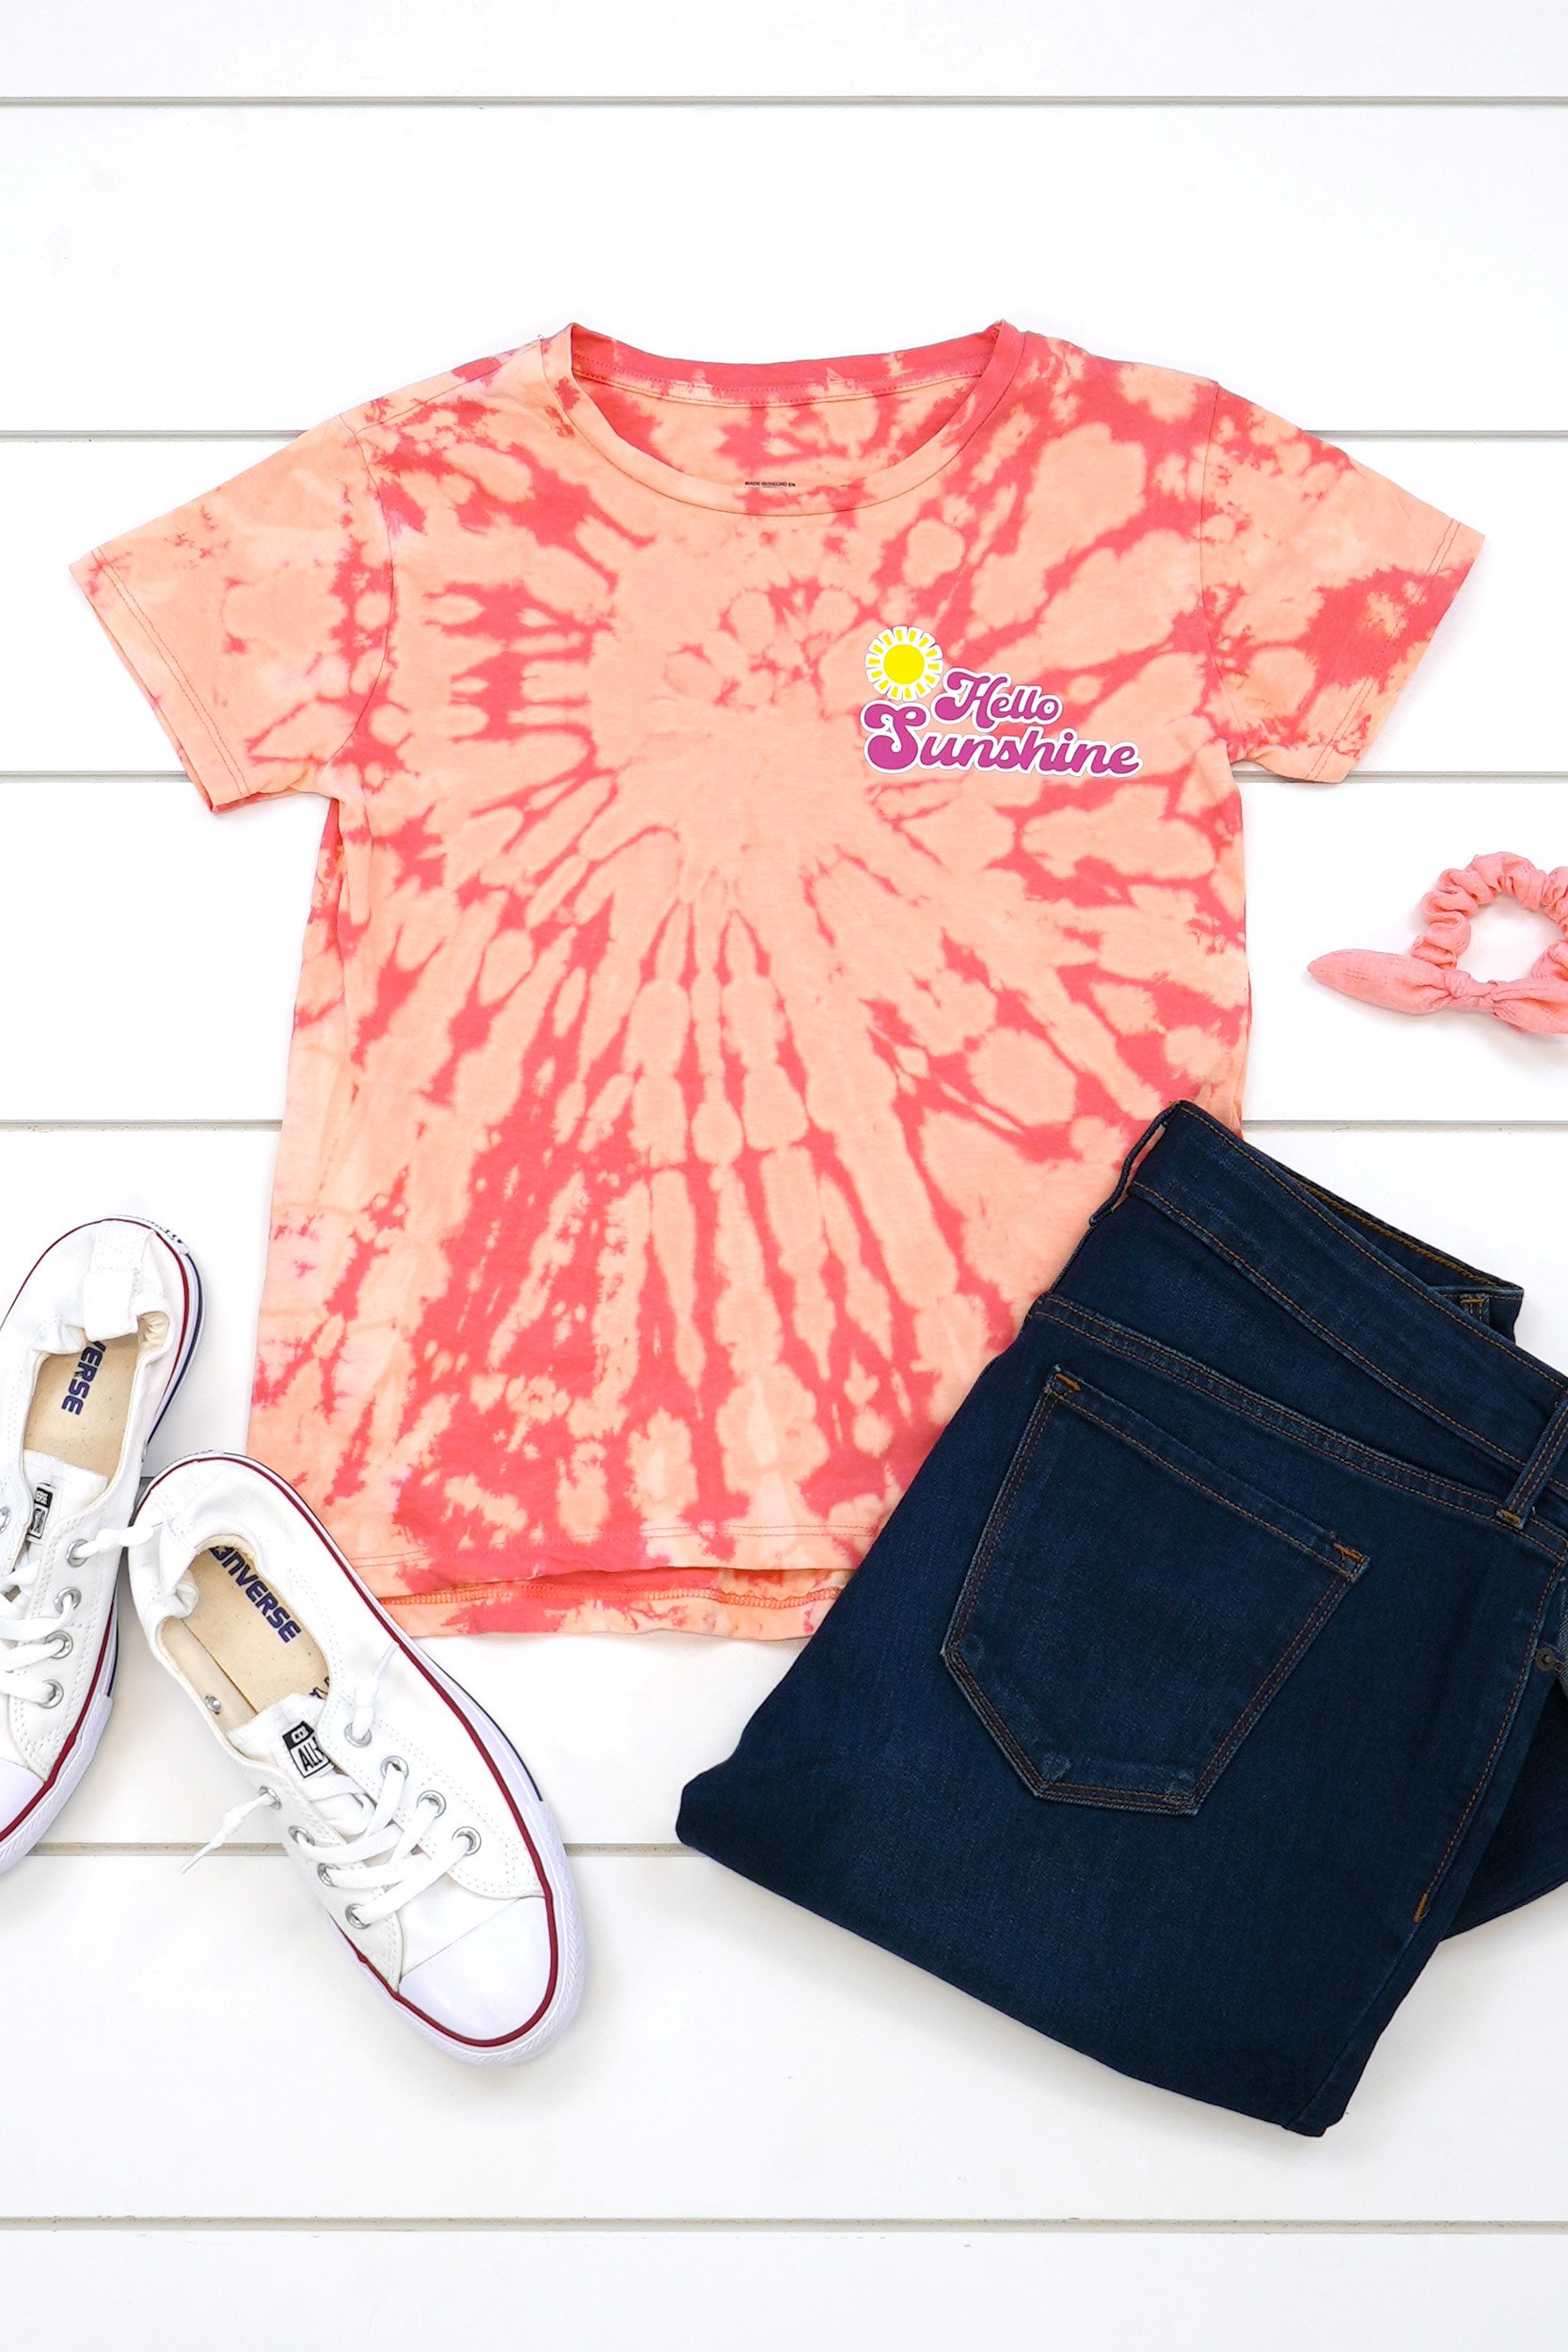 Peach and coral spiral bleach tie-dyed t-shirt with an outfit on white wood background